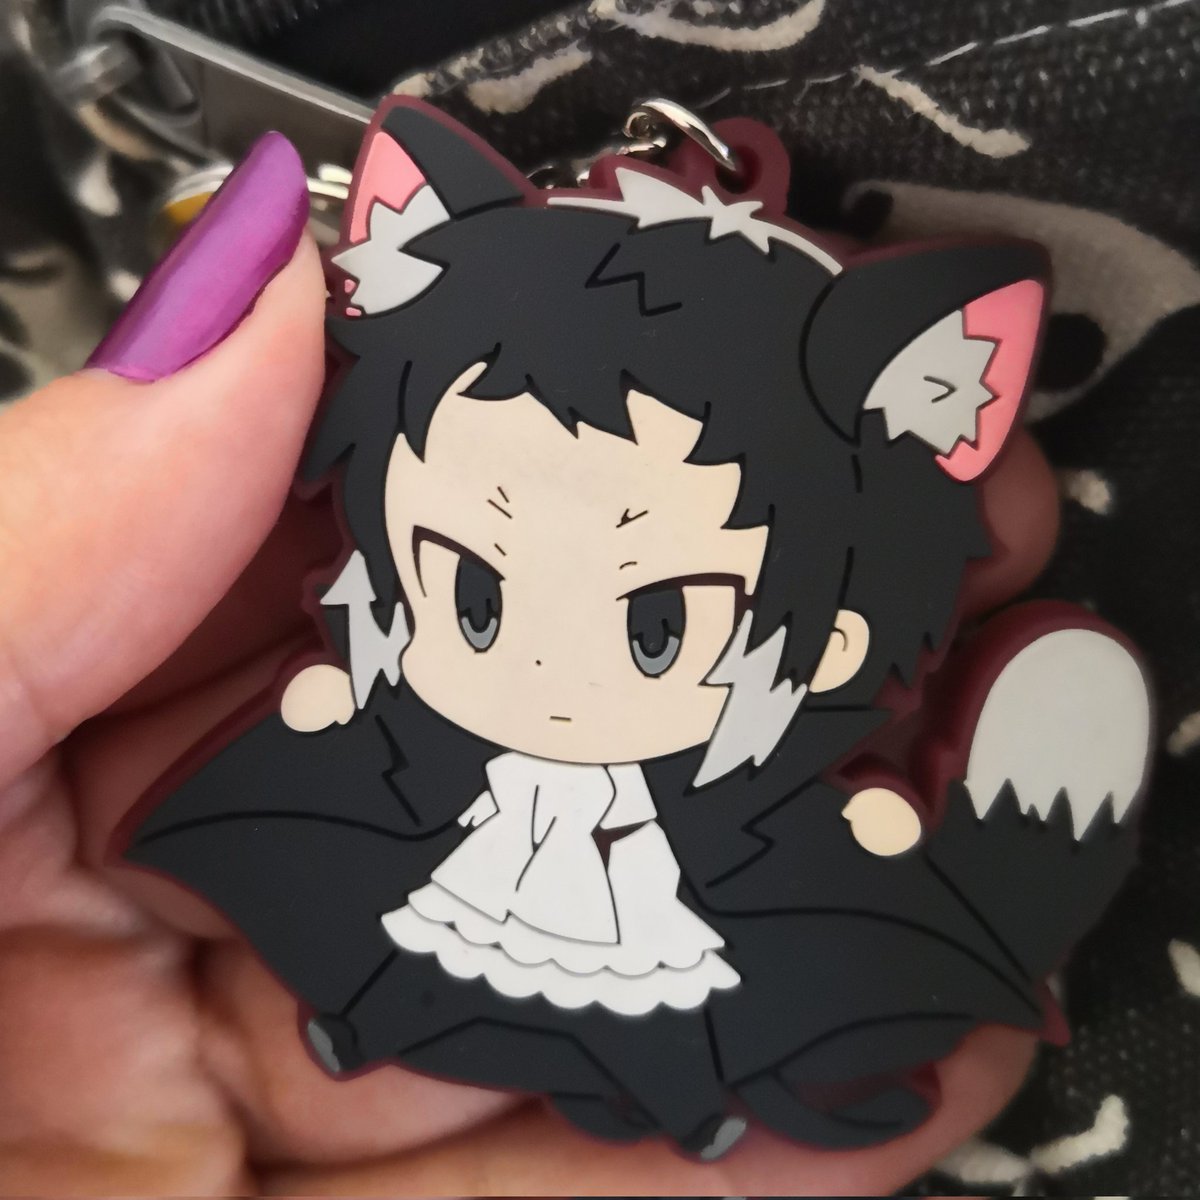 I FINALLY FOUND IT. I TRIED TO LOOK FOR PICS OF THIS KEYCHAIN EVERYWHERE AND I THOUGHT I GASLIT MYSELF INTO THINKING IT EXISTS. I TRIED MY LUCK W THESE BLIND BOXES BC THIS WAS THE DISPLAY ONE THEY HAD AND ALL I GOT WAS THIS STUPID FUCKING WET CAT